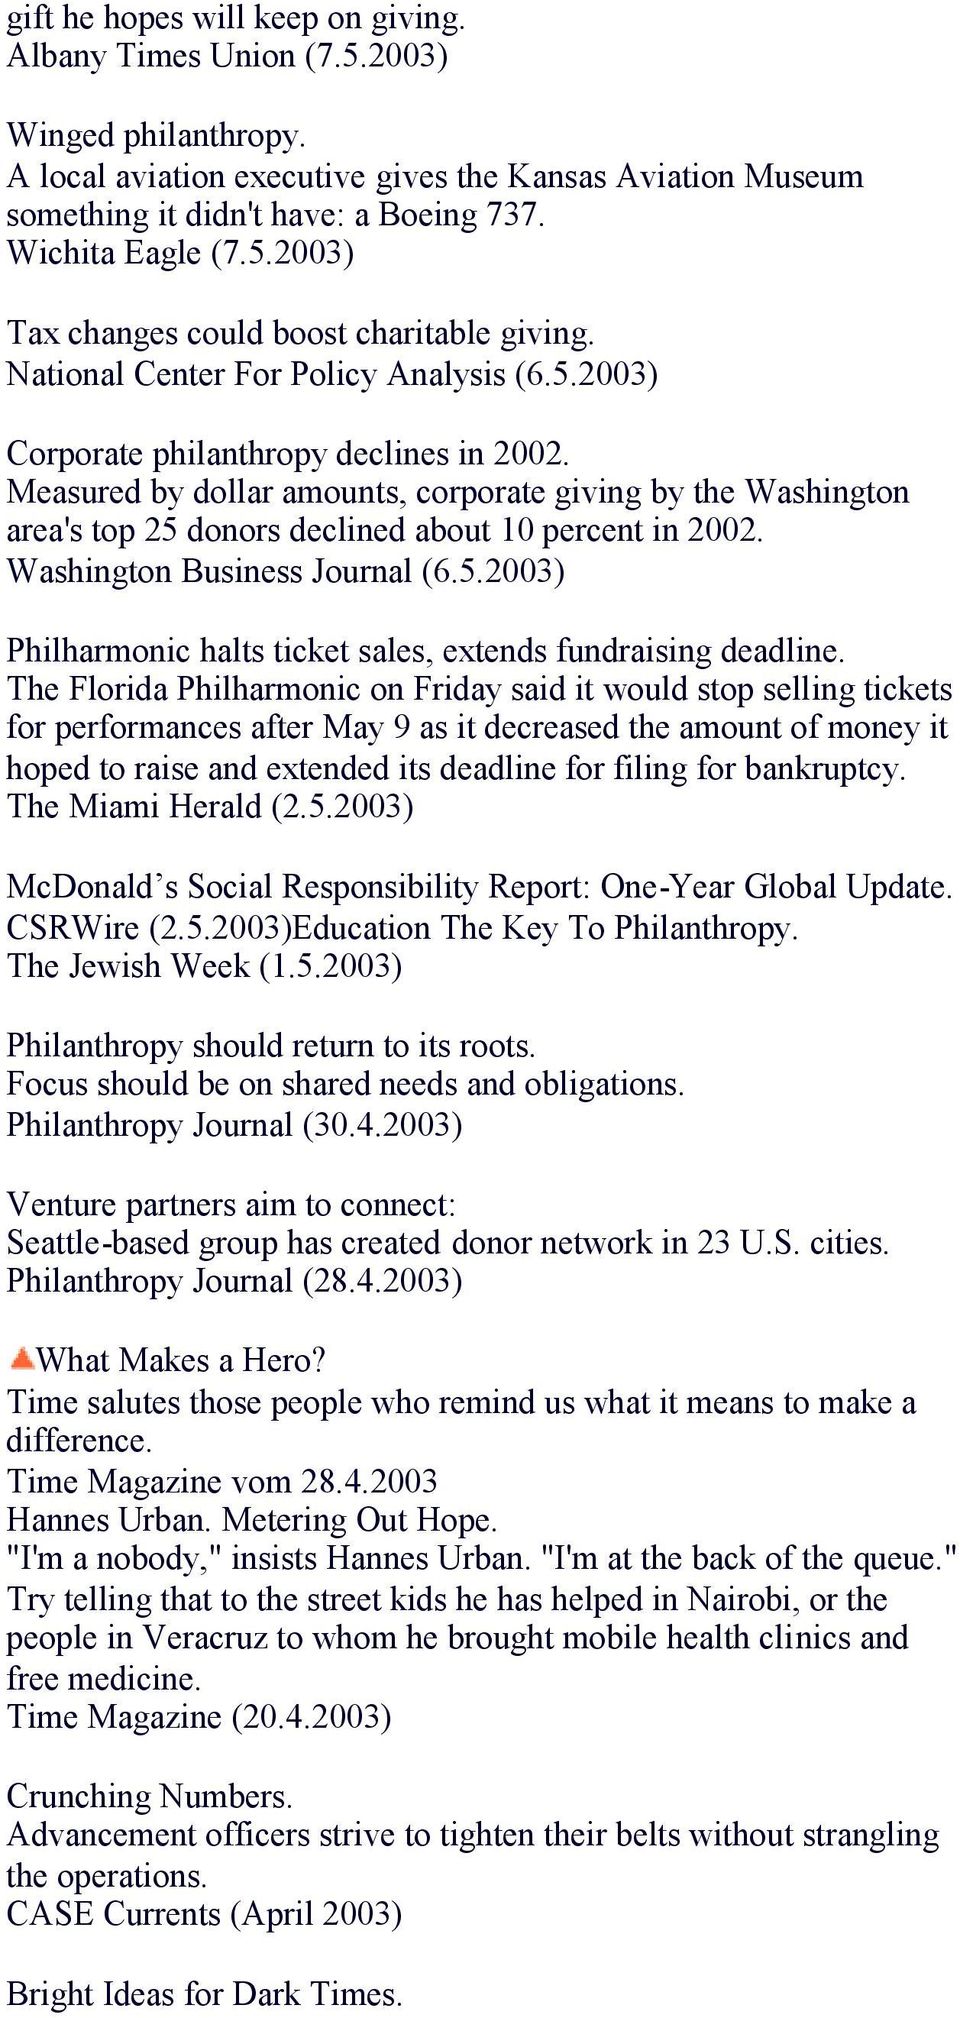 Measured by dollar amounts, corporate giving by the Washington area's top 25 donors declined about 10 percent in 2002. Washington Business Journal (6.5.2003) Philharmonic halts ticket sales, extends fundraising deadline.